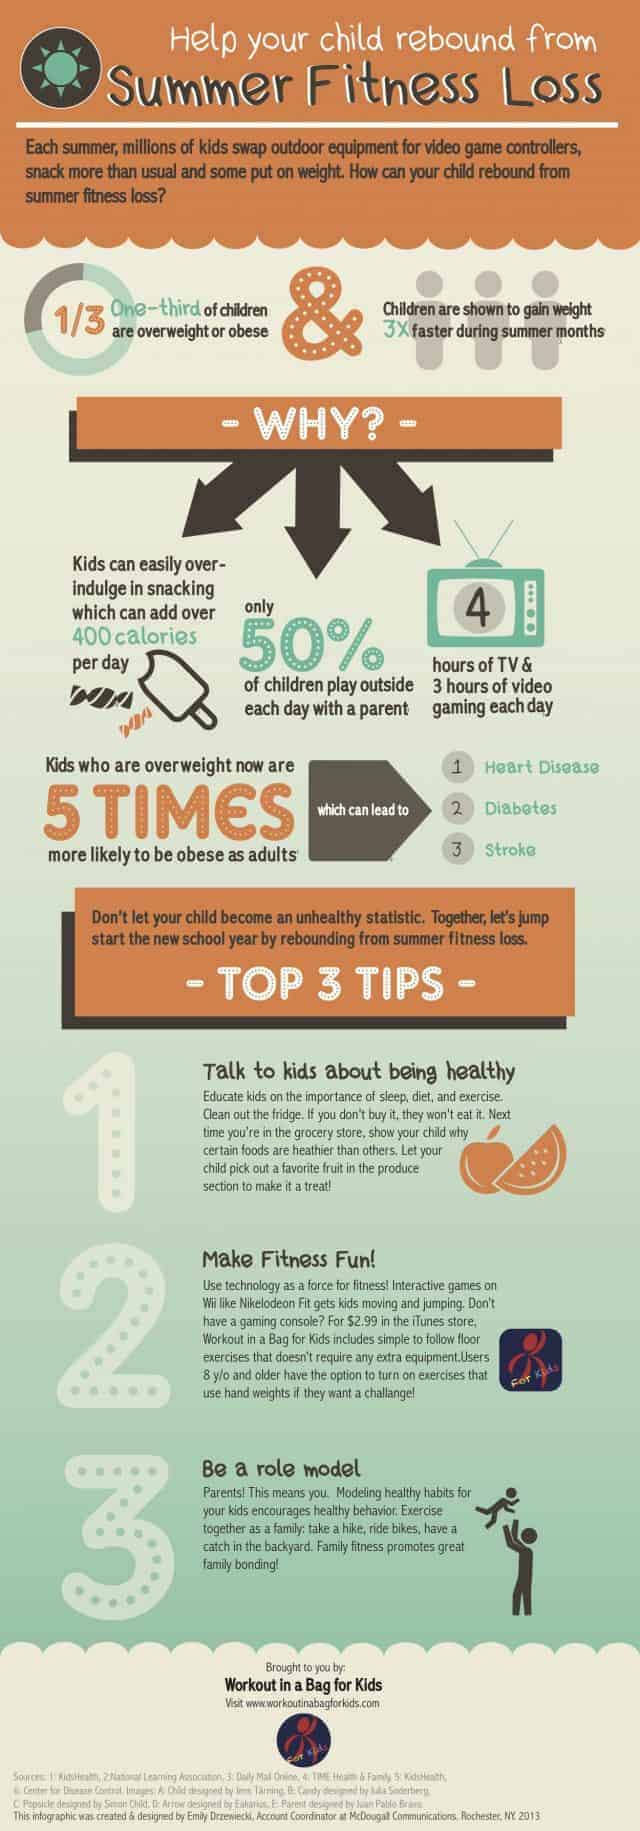 Help Your Kids Rebound from Summer Fitness Loss